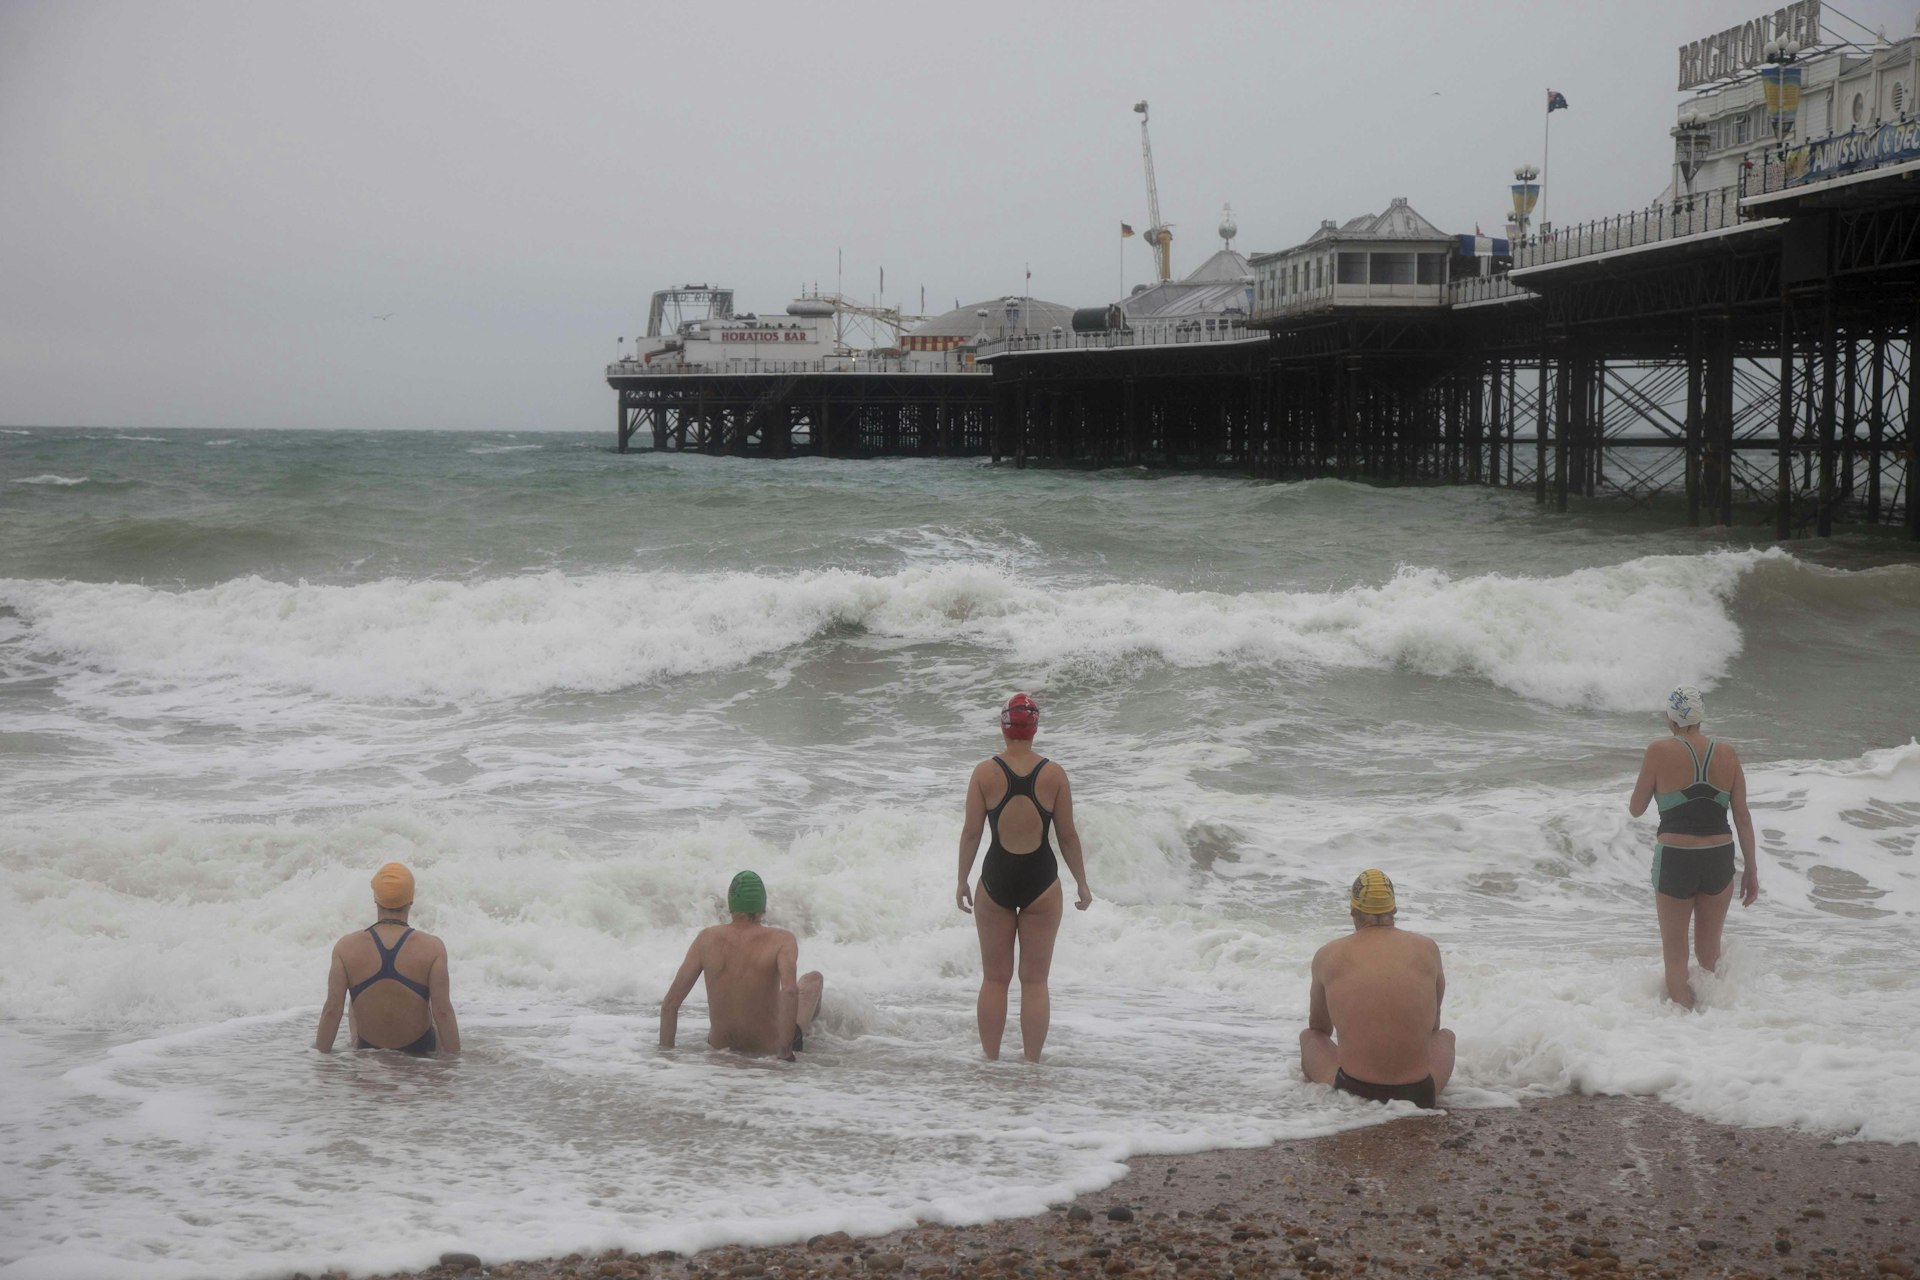 GB. England. Brighton. Members of the Sea Swimming Club who meet daily to swim in the sea. 2010 © Martin Parr / Magnum Photos